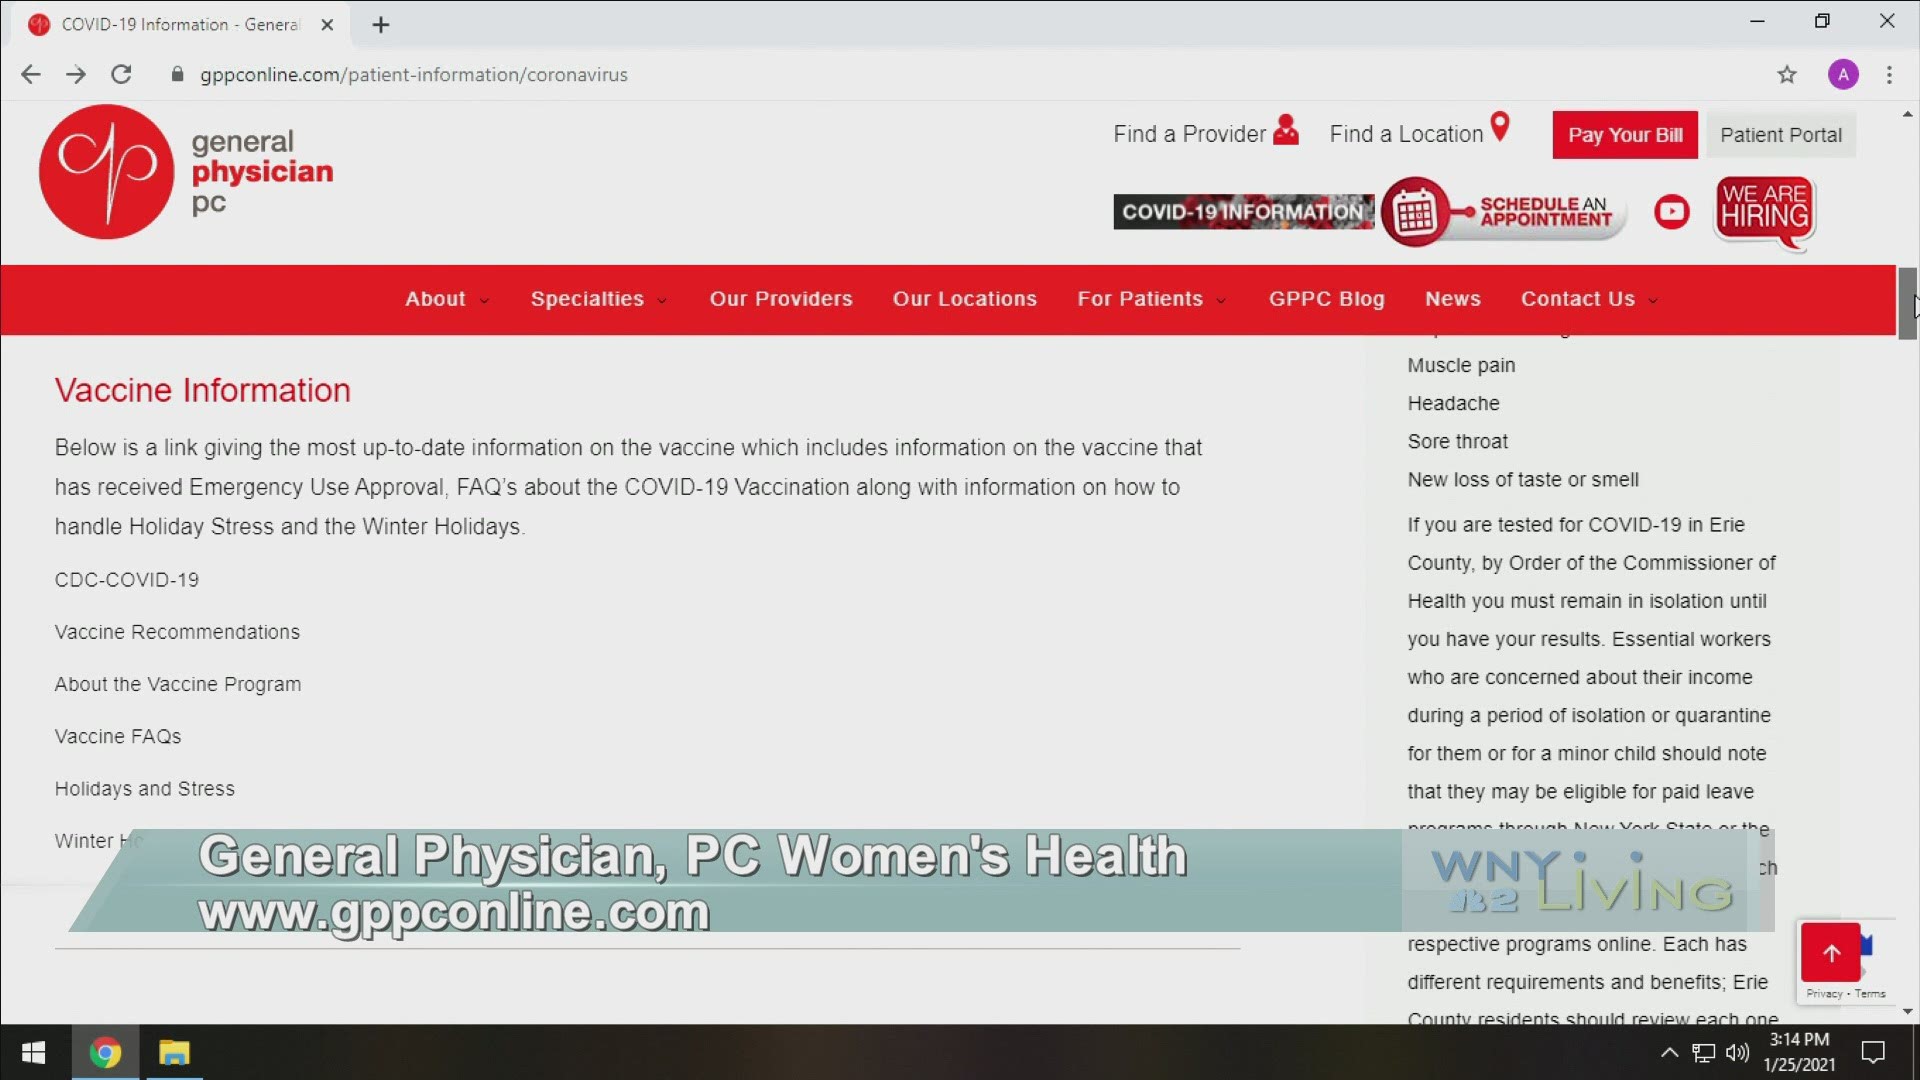 WNY Living - January 30 - General Physician, PC (THIS VIDEO IS SPONSORED BY GENERAL PHYSICIAN, PC)